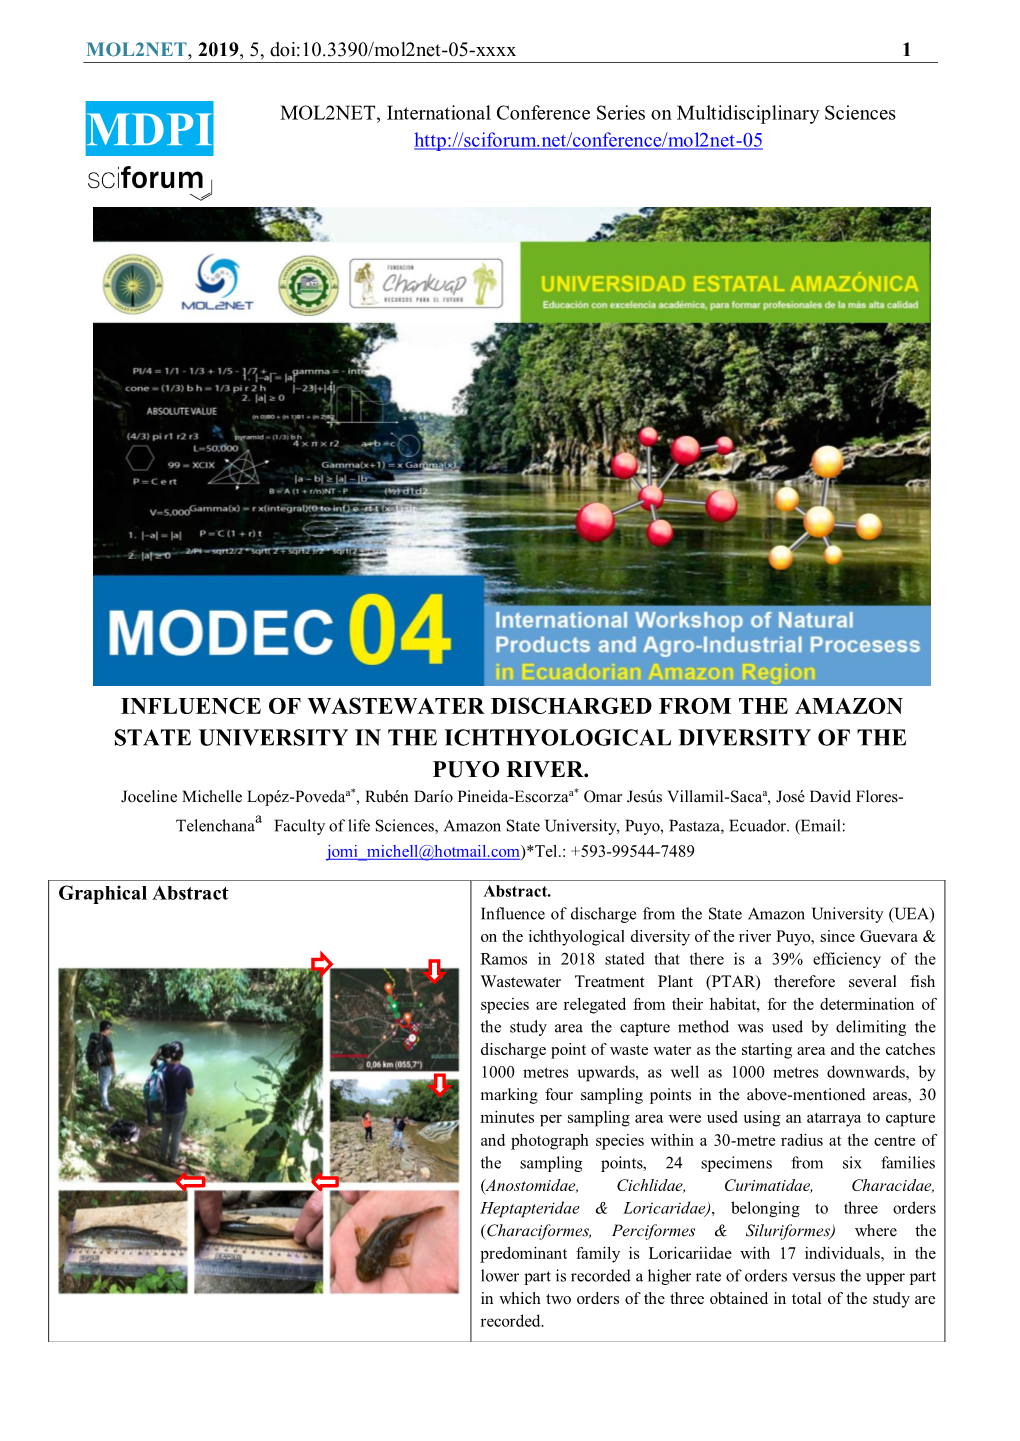 Influence of Wastewater Discharged from the Amazon State University in the Ichthyological Diversity of the Puyo River